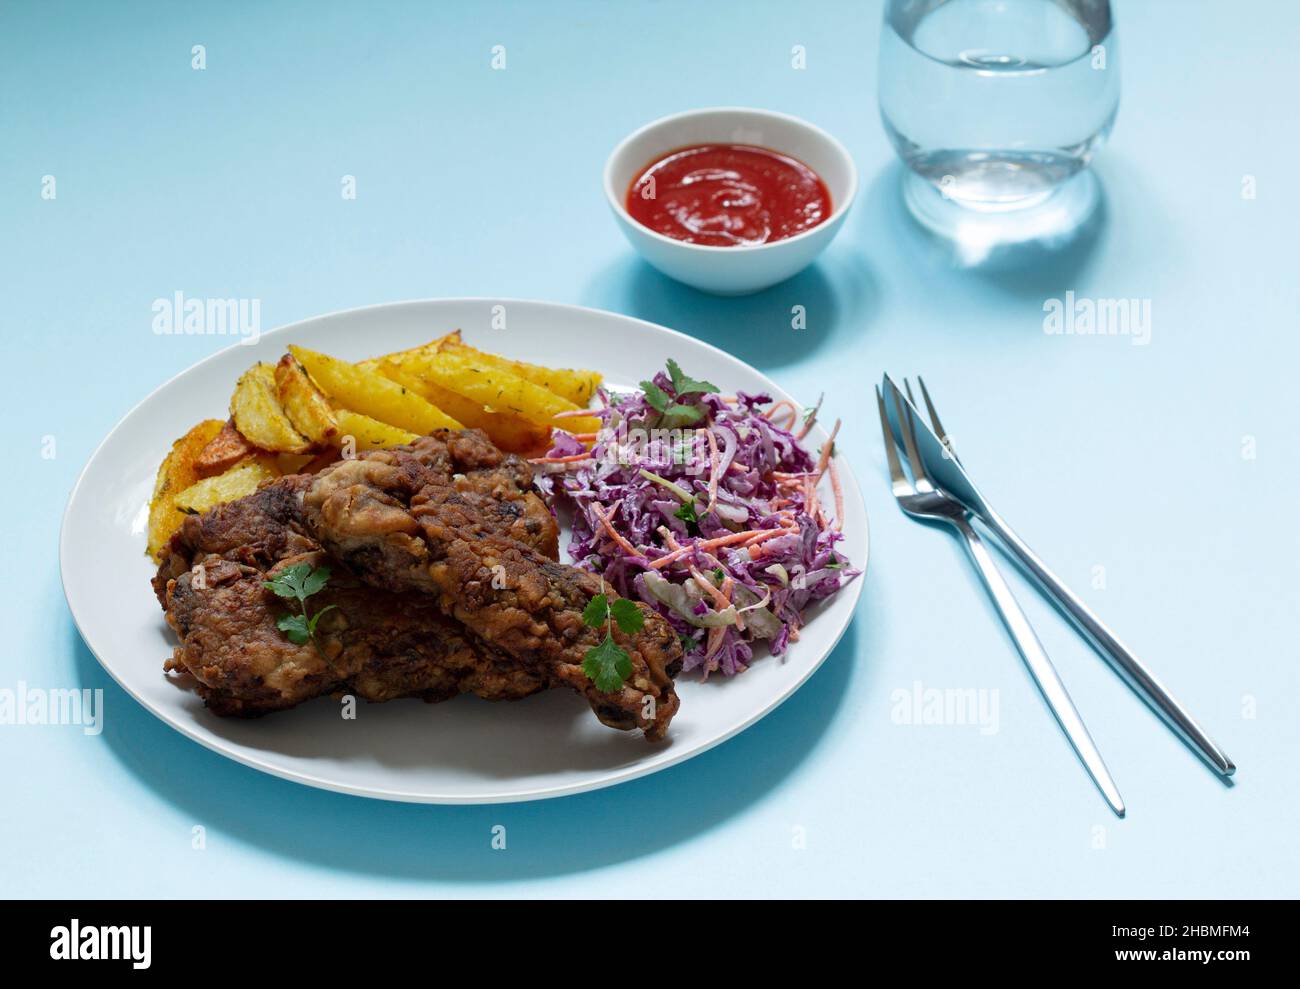 A traditional American dinner of fried ribs, fried potatoes and coleslaw. Stock Photo